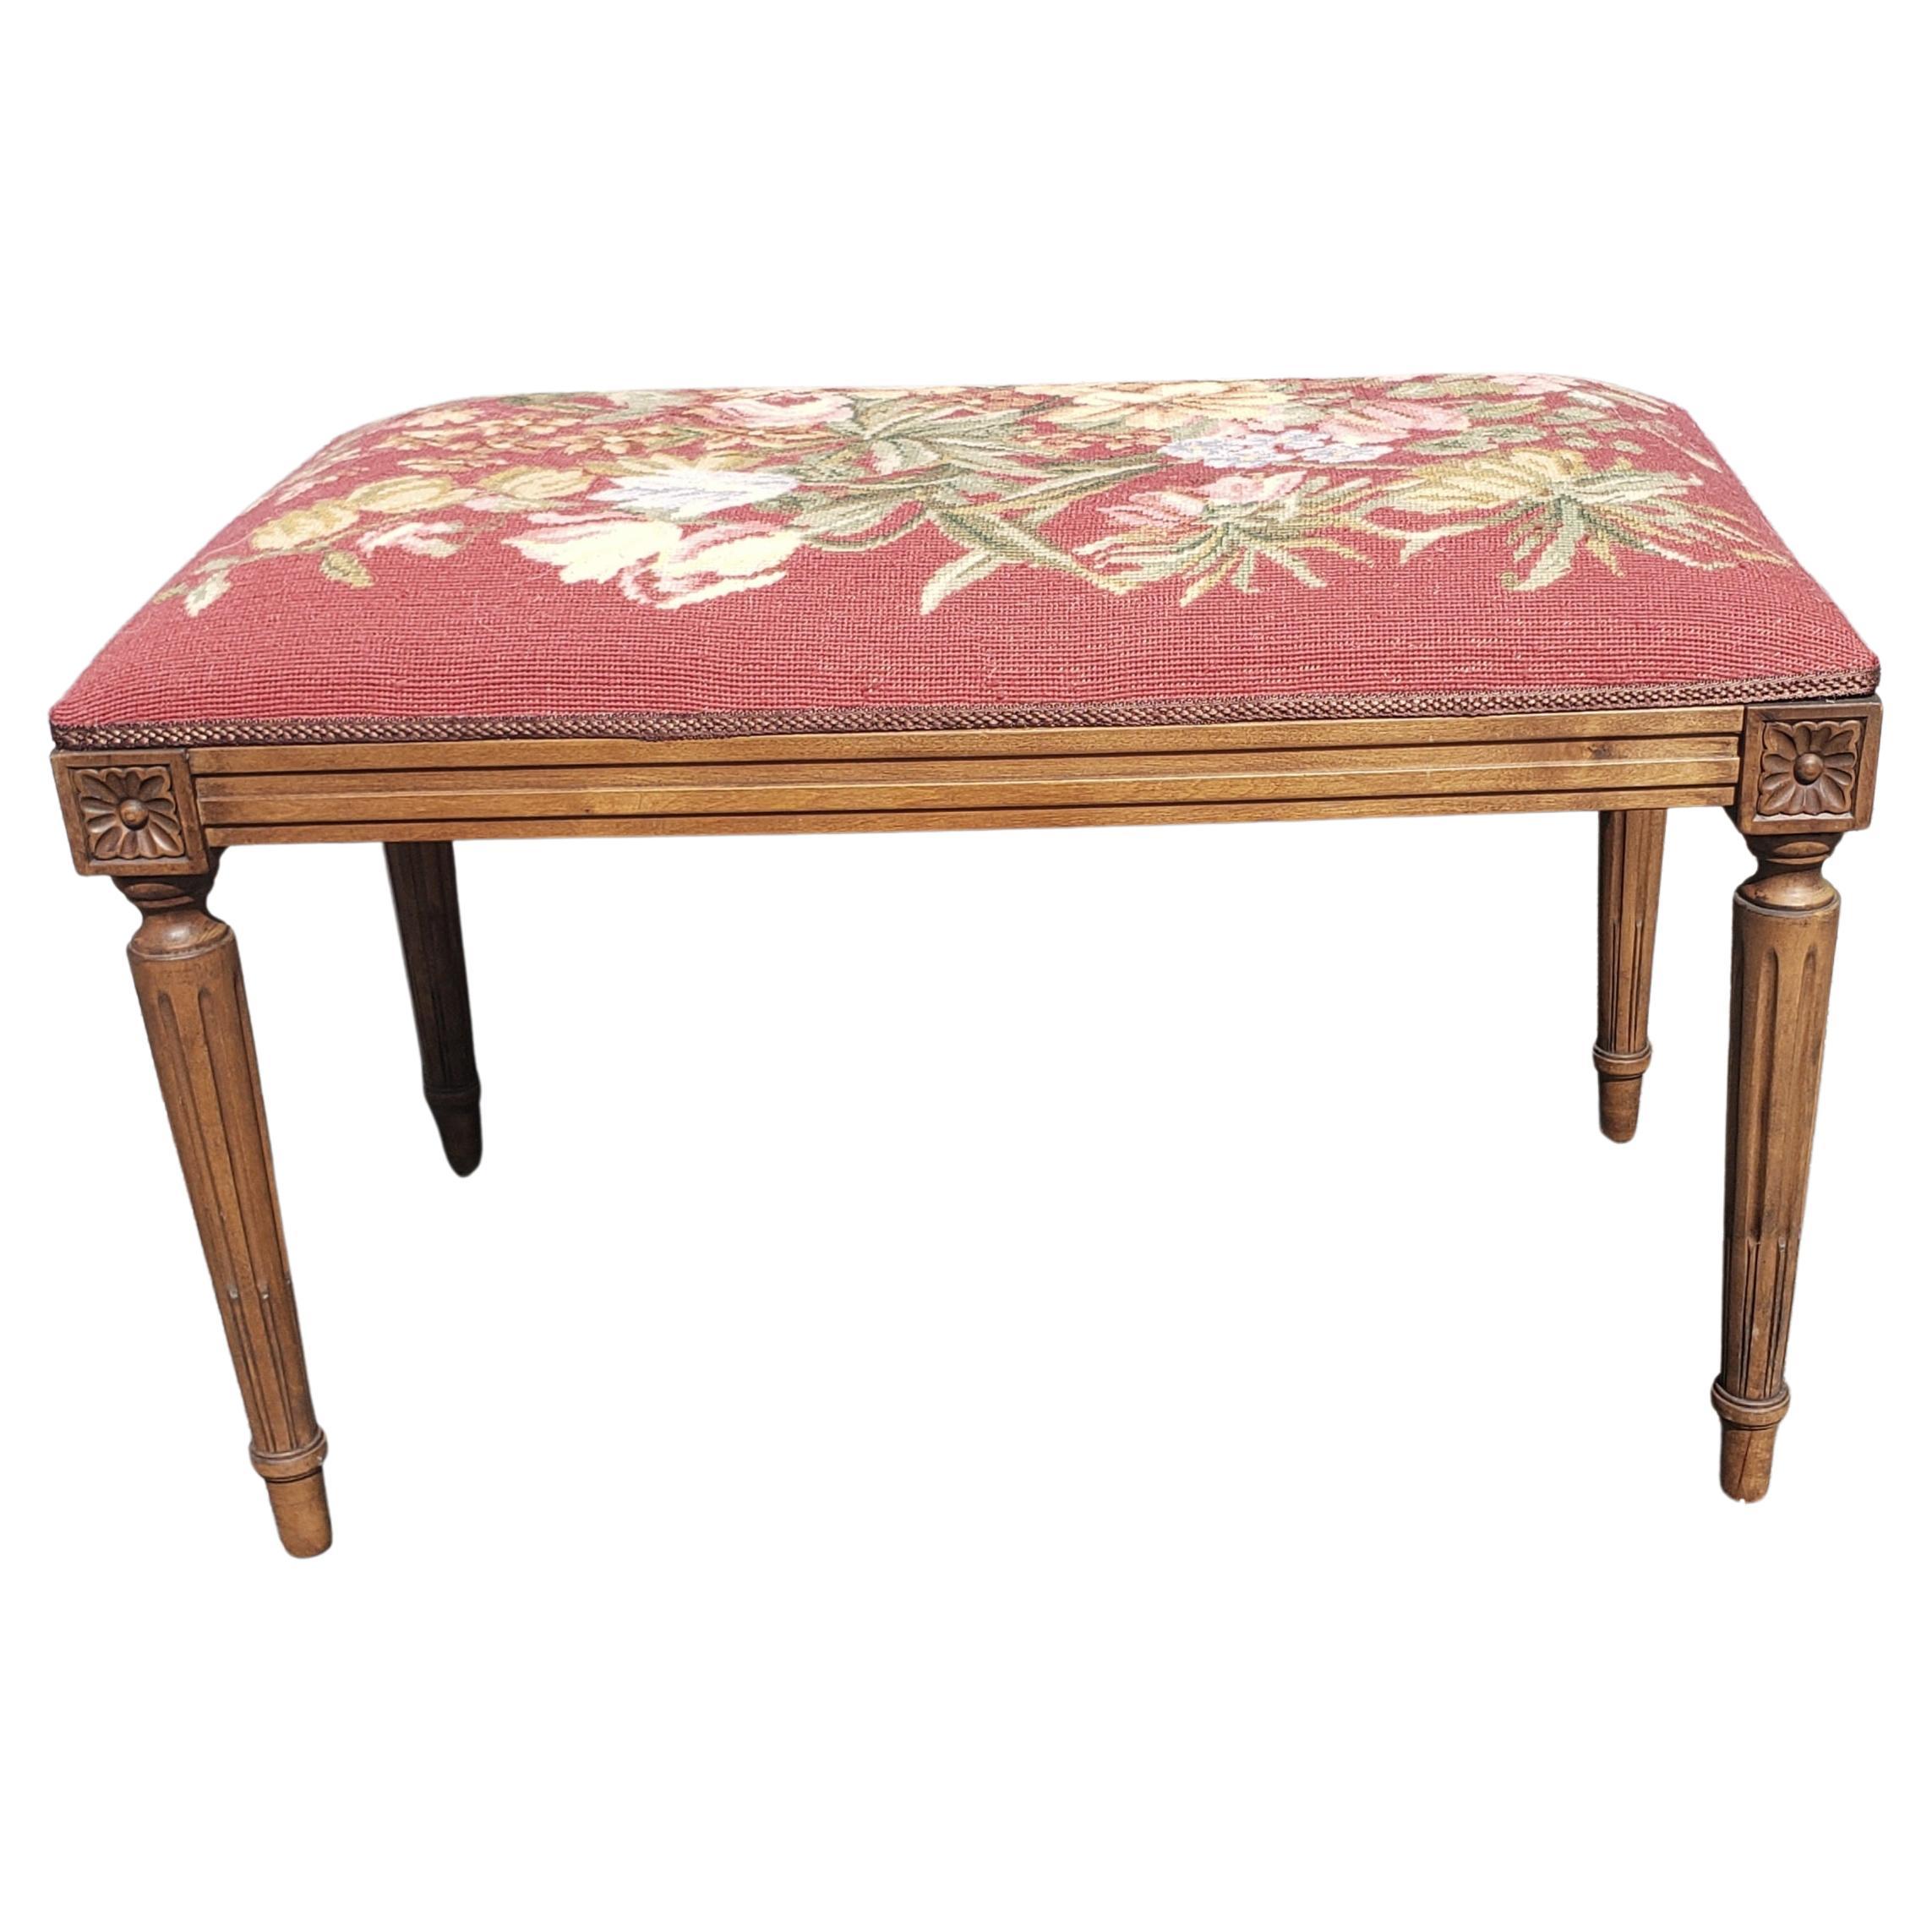 A Louis XVI style walnut tabouret bench late 20th century, having a needlework top, above ribbon carved and fluted walnut legs. Wonderful warm patina to the surface. Measures 31.5